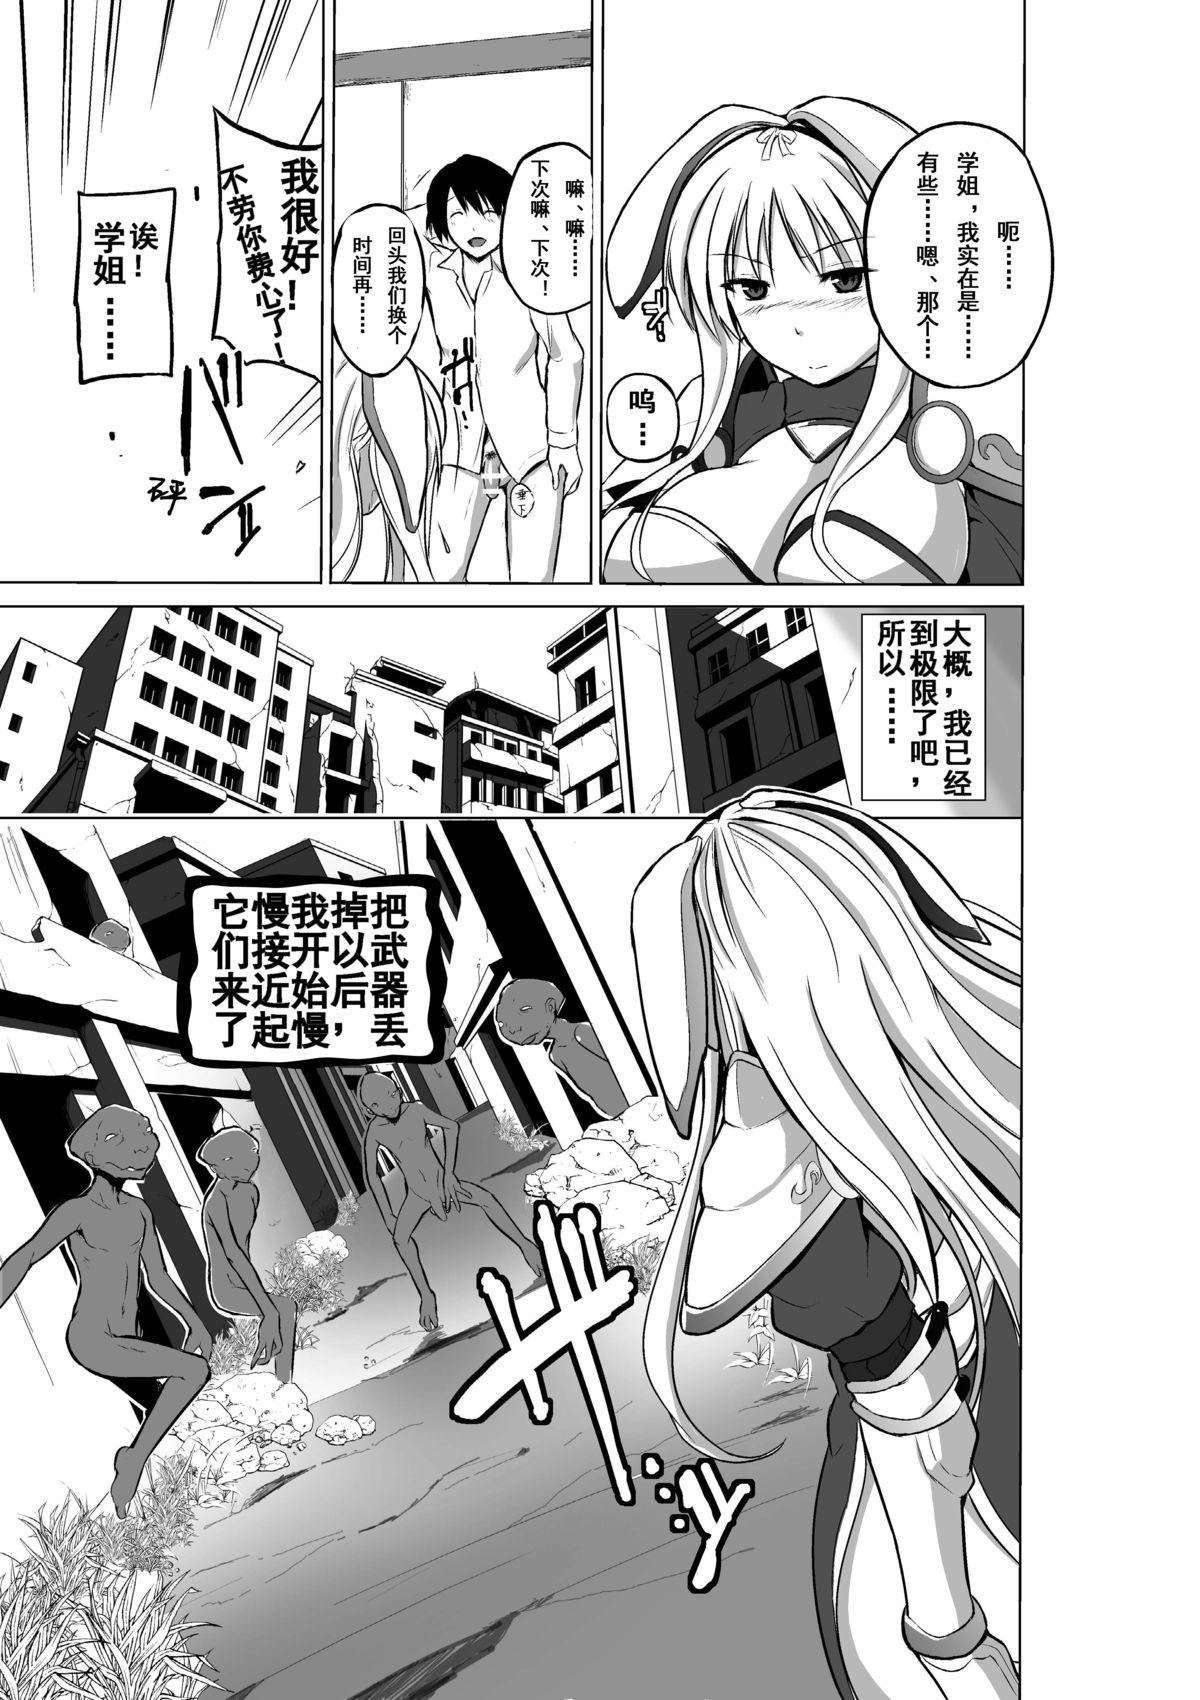 Ass Fetish Dungeon Travelers - Sasara no Himegoto 2 - Toheart2 Girl Gets Fucked - Page 7